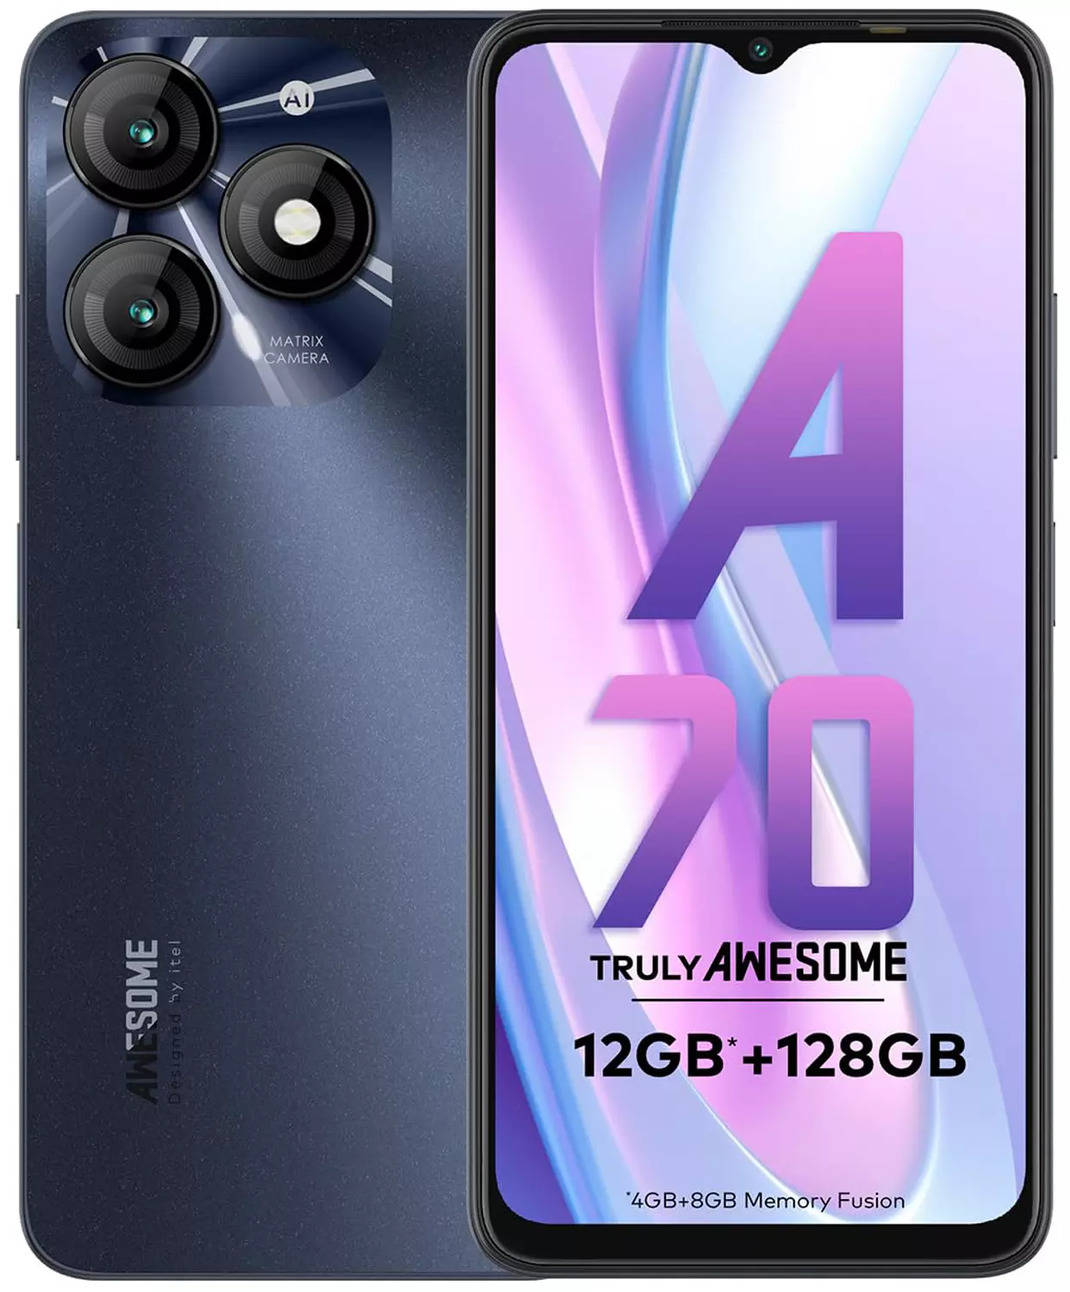 Xiaomi Redmi Note 7 Pro Second Hand Smartphone at Rs 6000, Sector 63, Noida